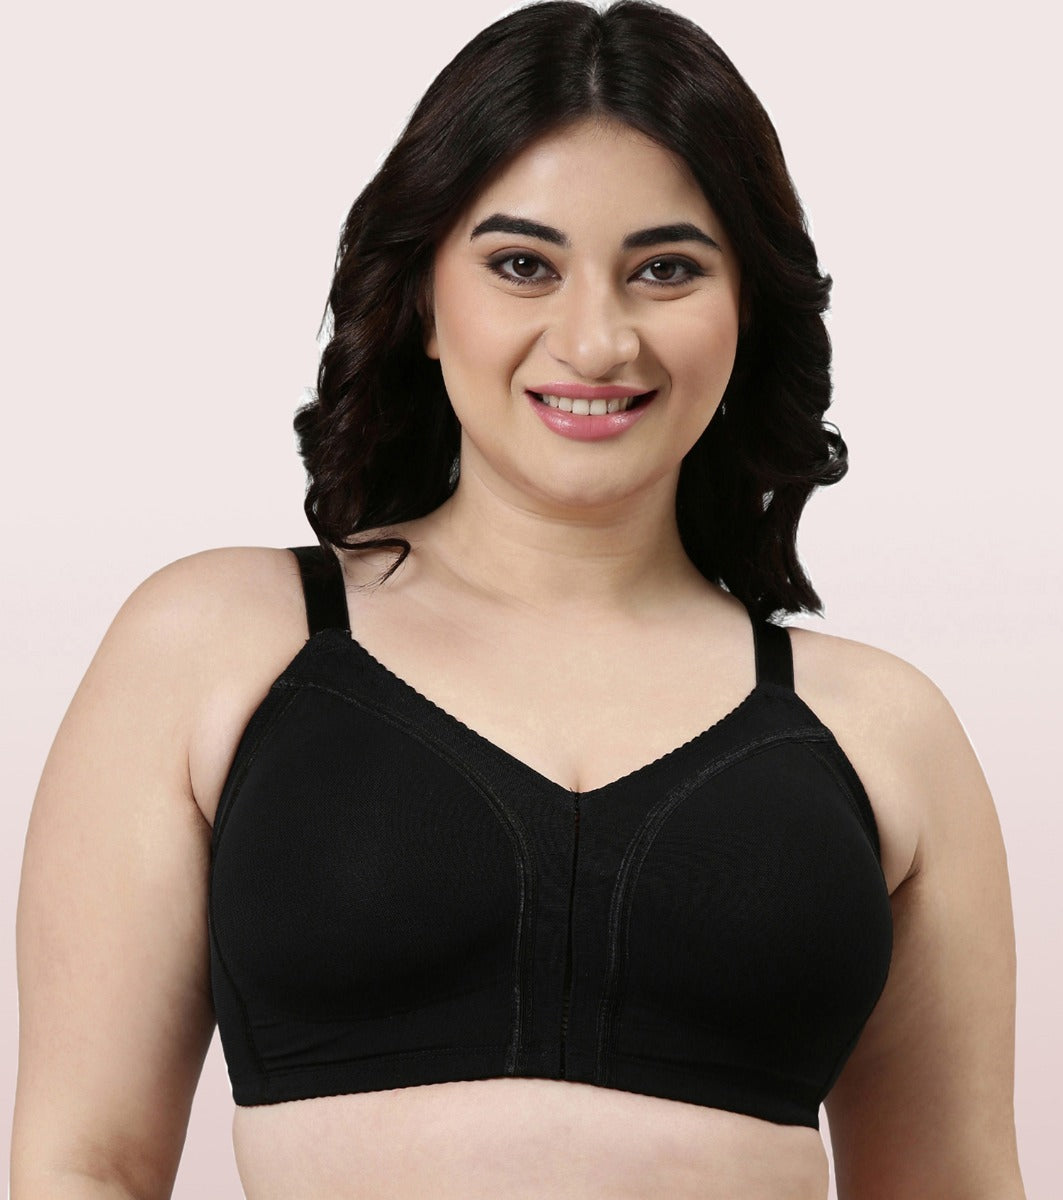 Enamor Body Transform F097 Smooth Contour Lift Bra for Women- Full Coverage, Non Padded and Wirefree - Black